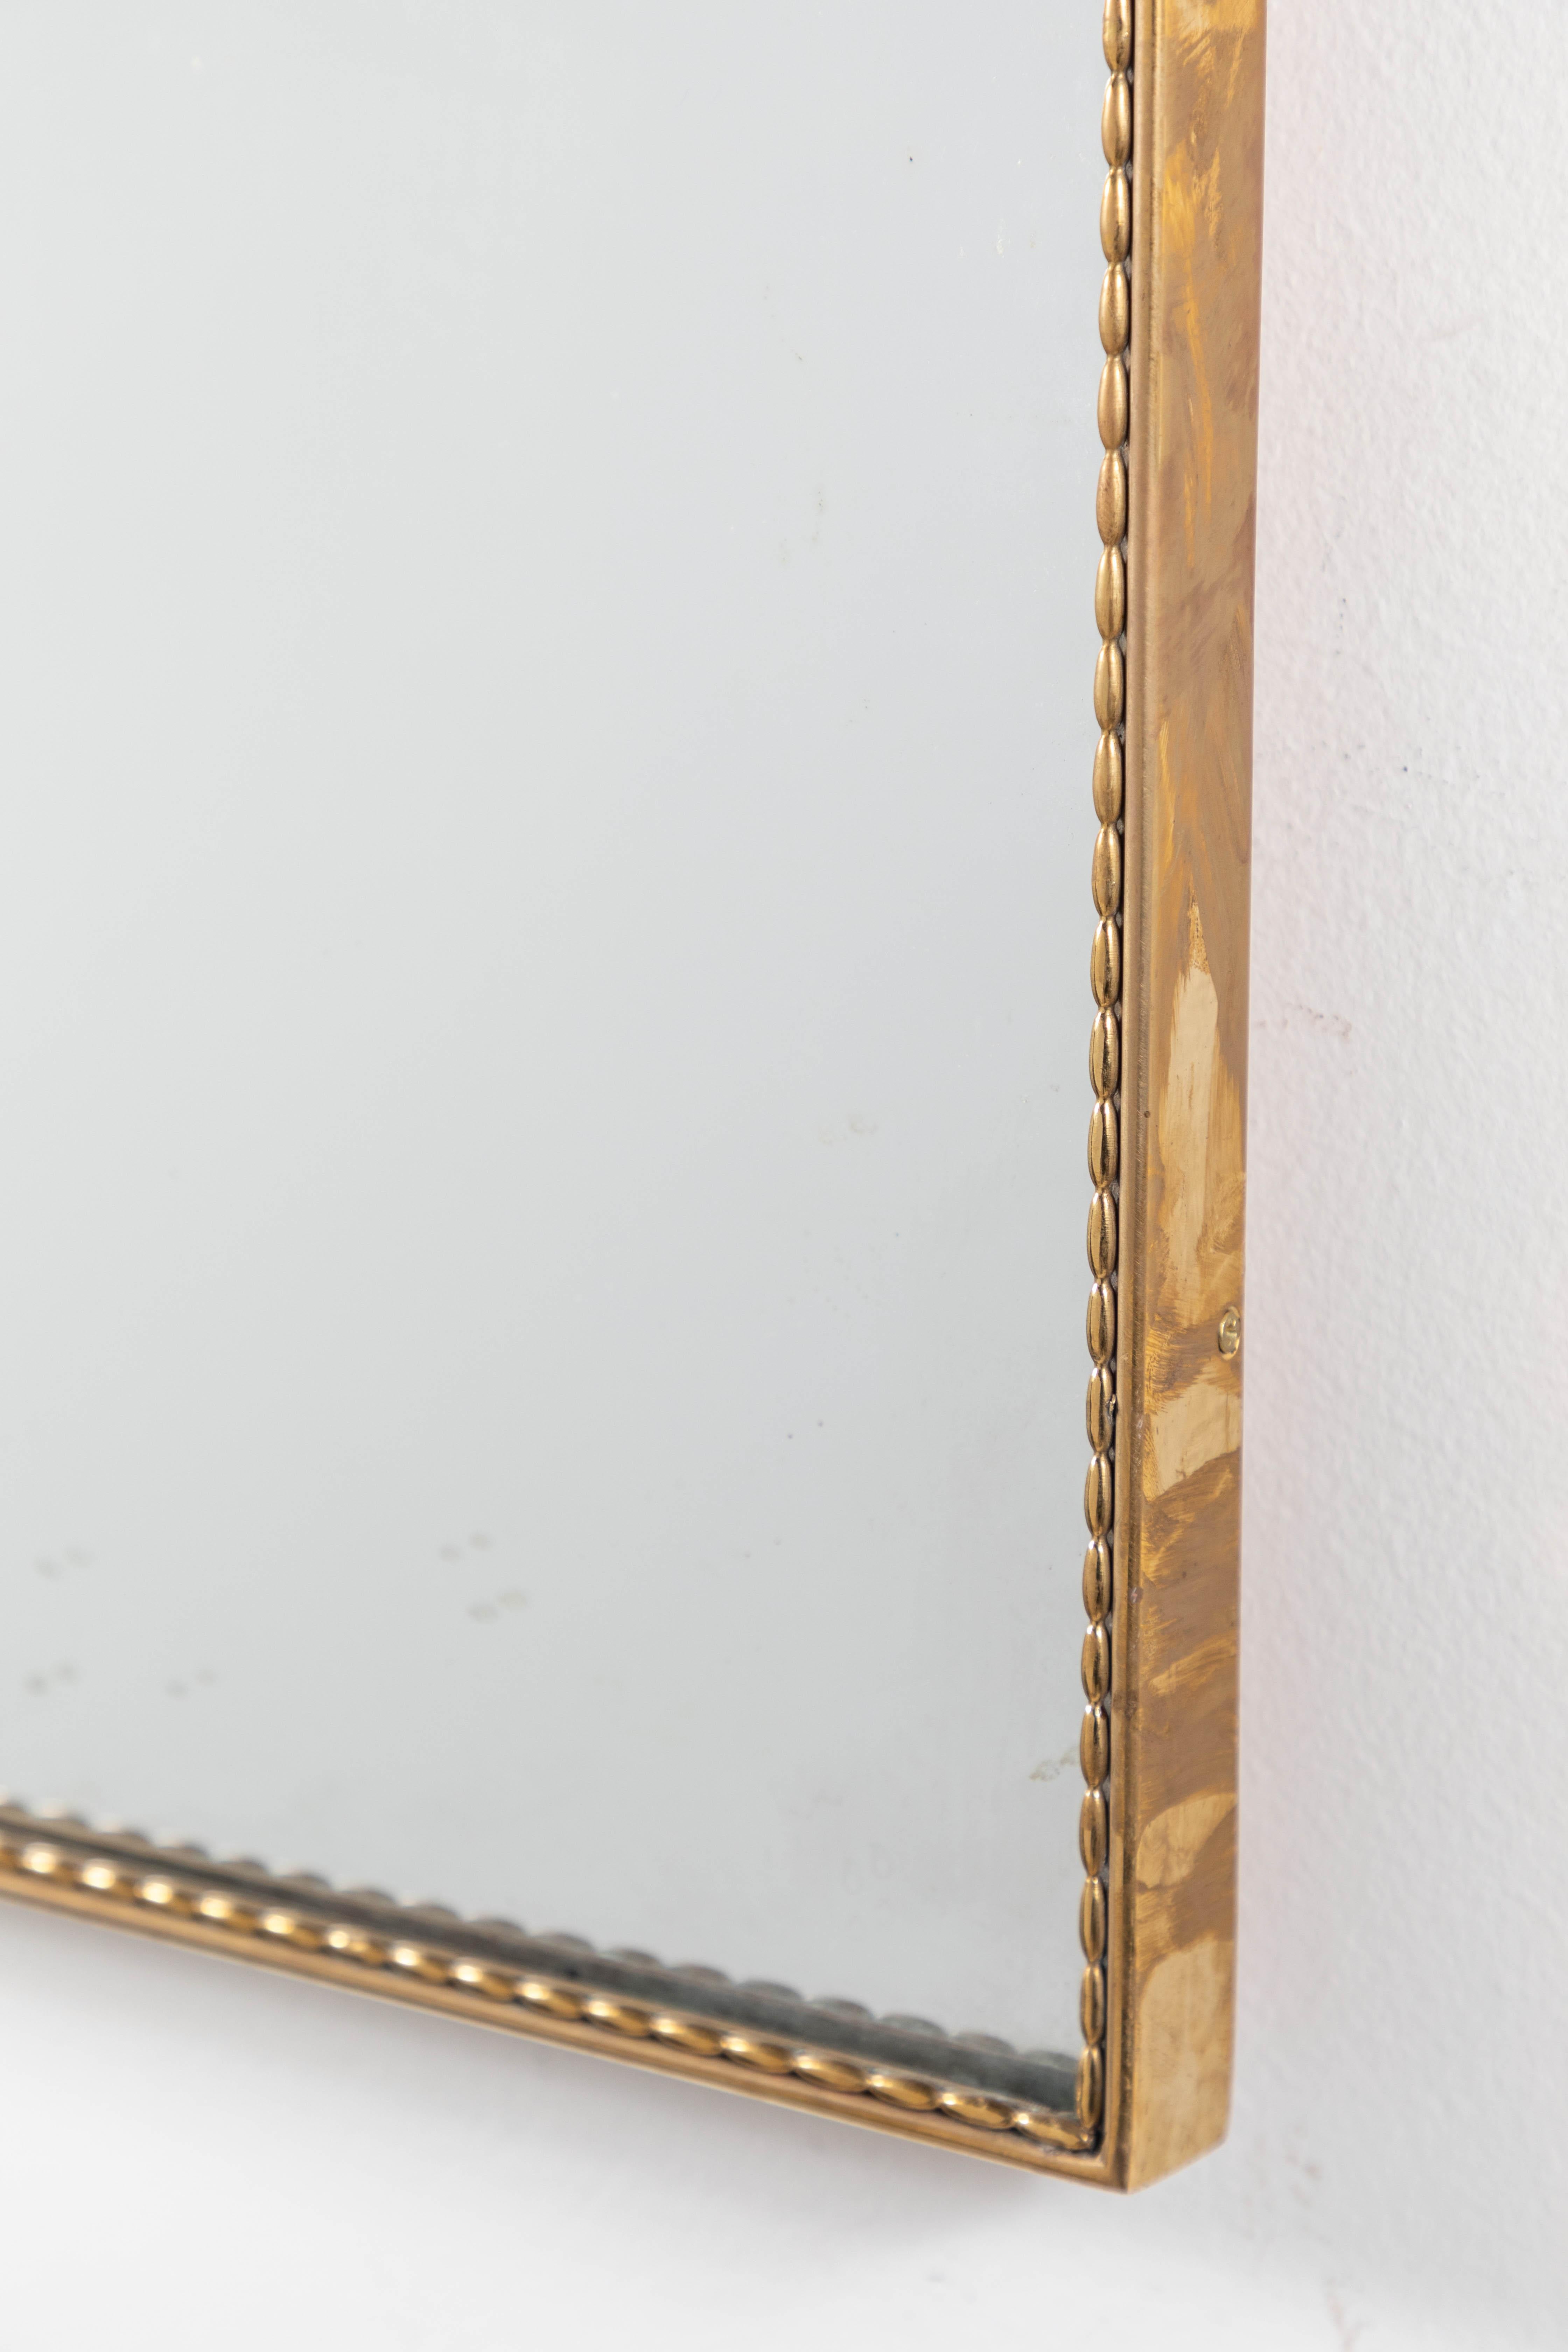 Mid-20th Century Vintage French Shield Mirror with Intricate Brass Beading